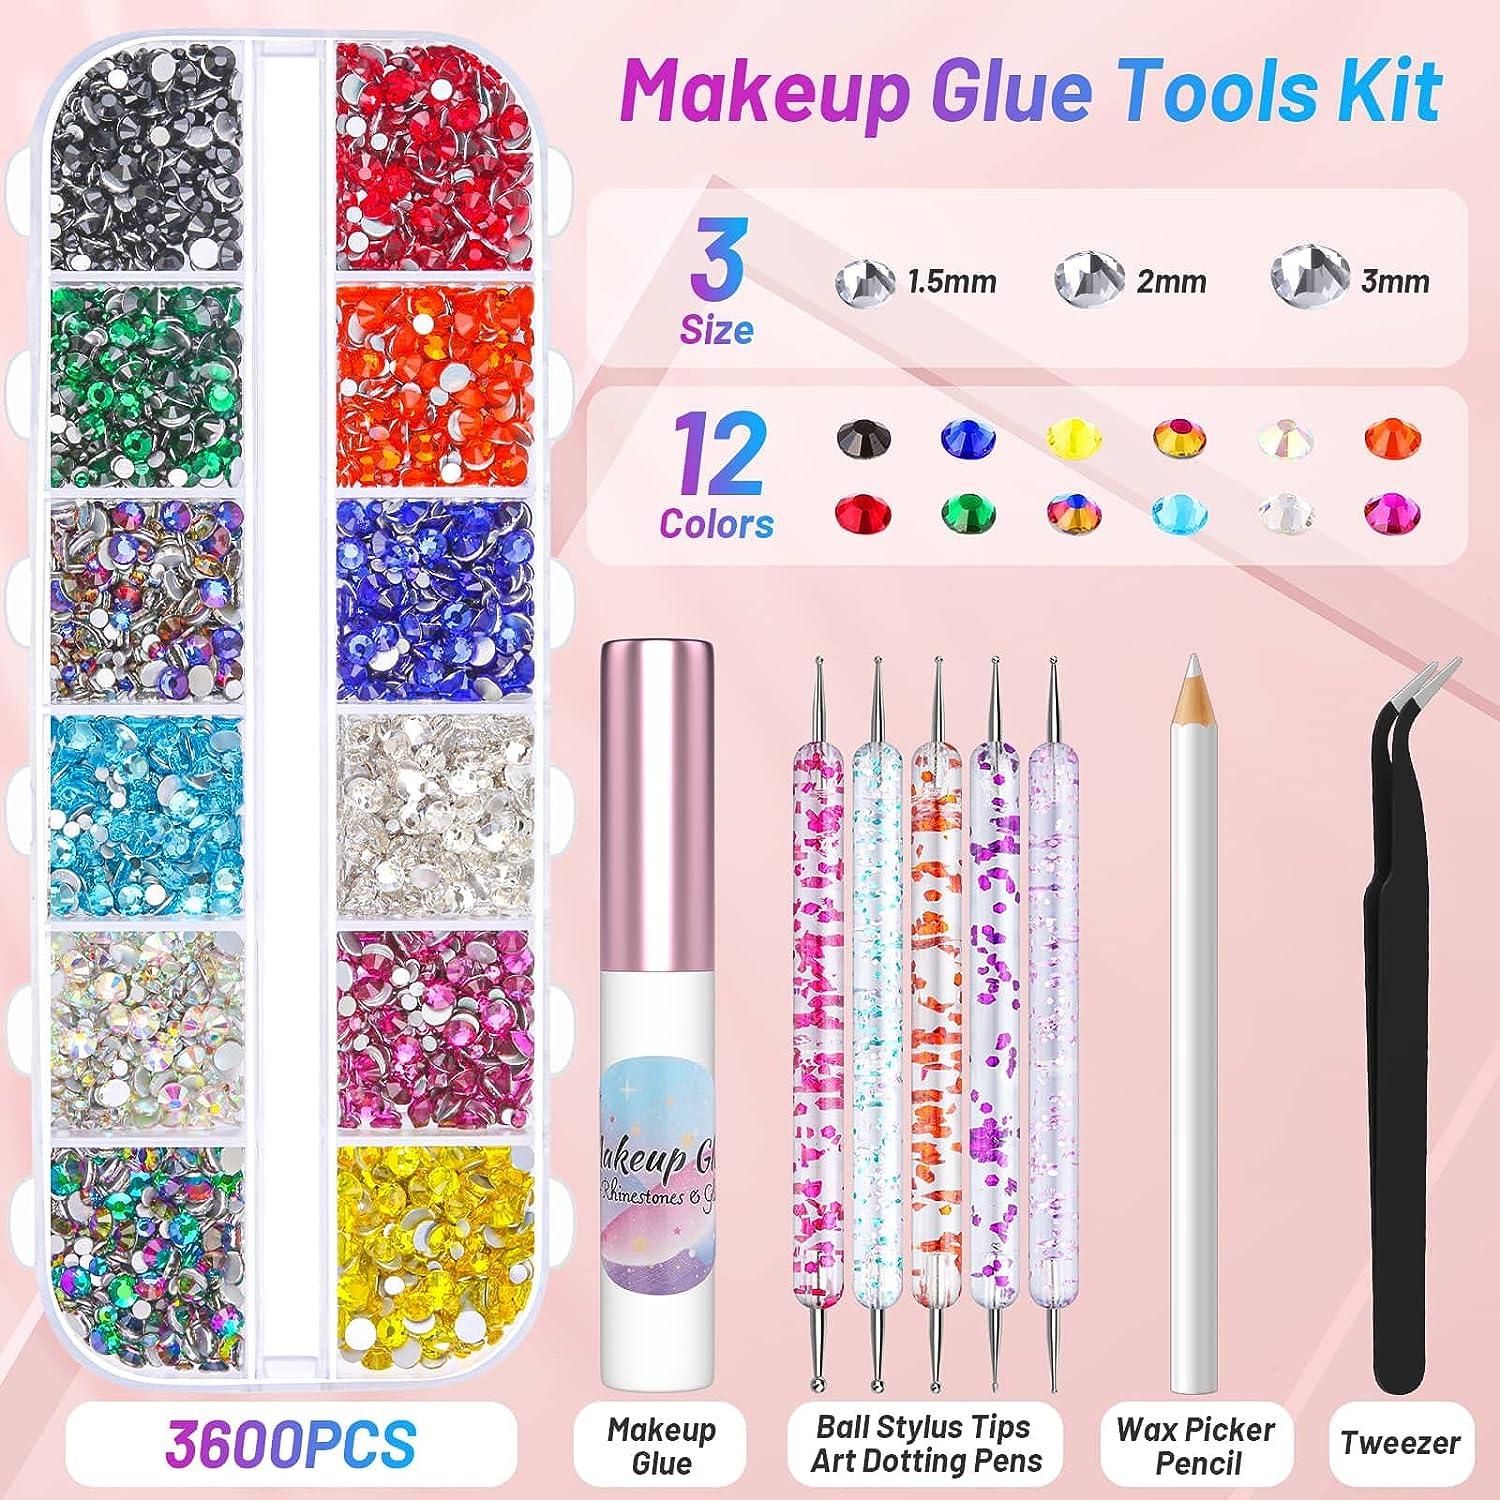 4200Pcs Face Gems Face Jewels with Makeup Glue FITTDYHE Multi